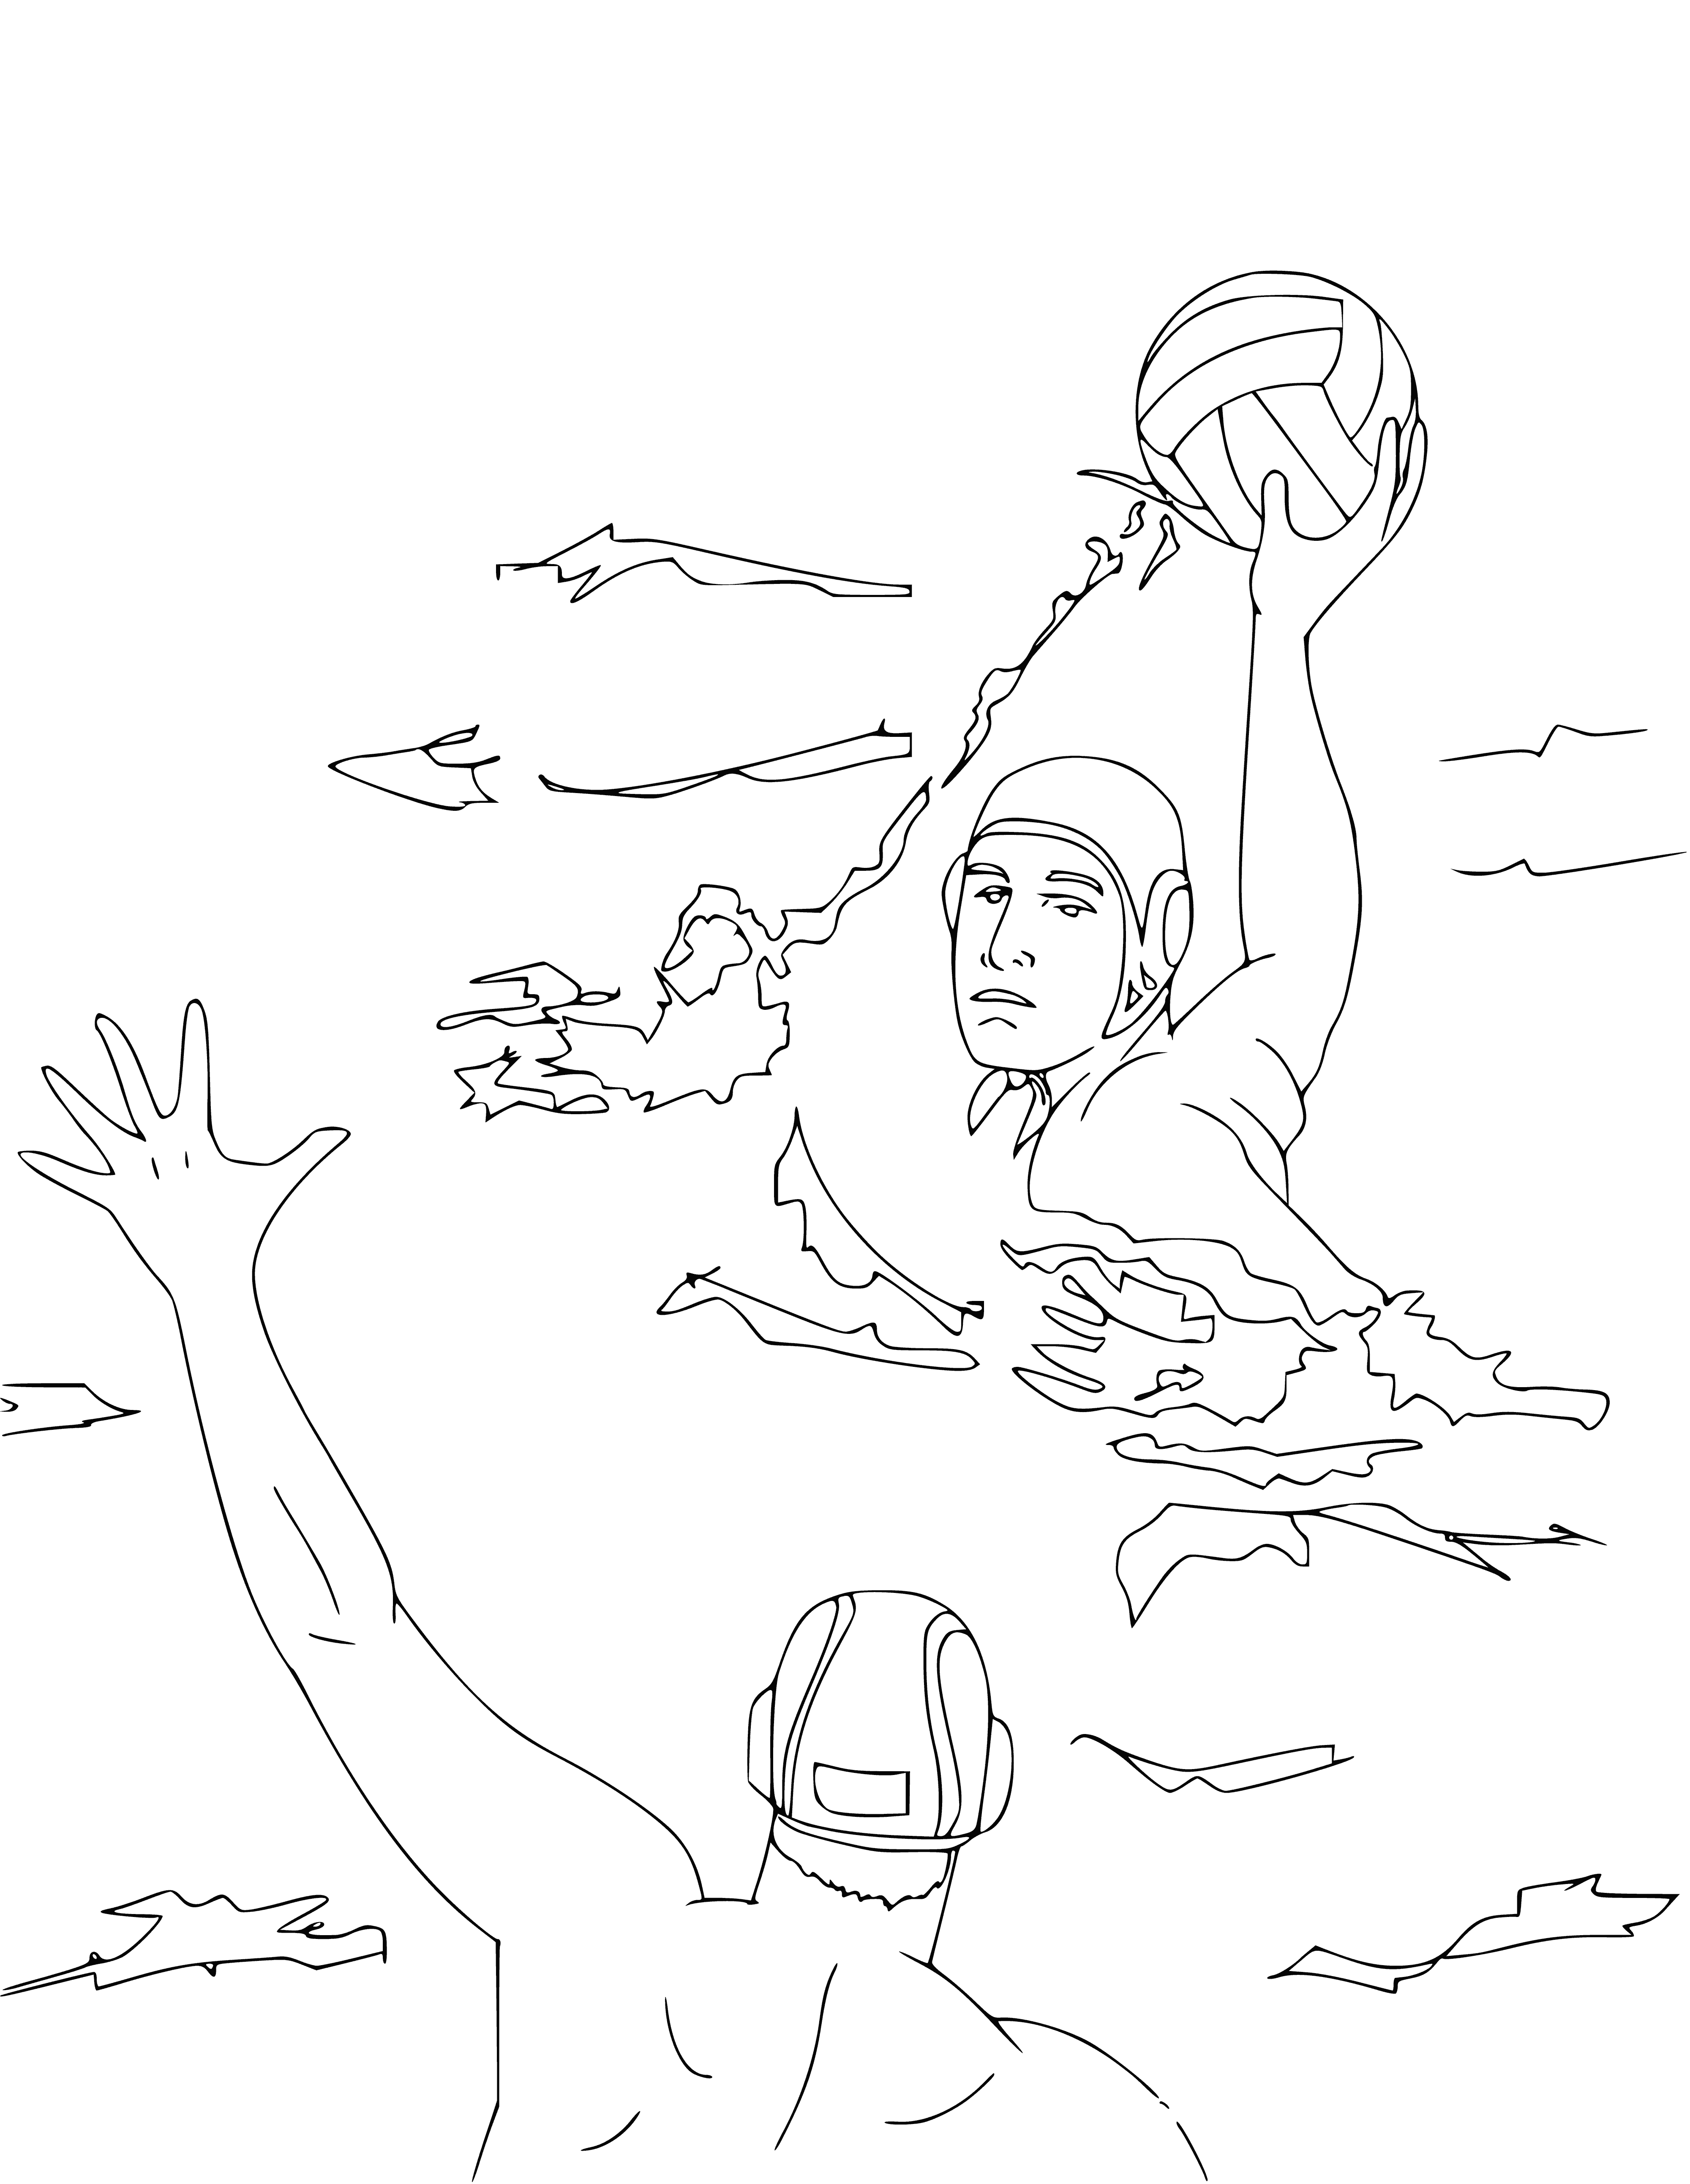 coloring page: Man & woman playing water polo in a pool. She has the ball, he's swimming behind her. Referee + goalkeeper in the water, all in swimsuits.